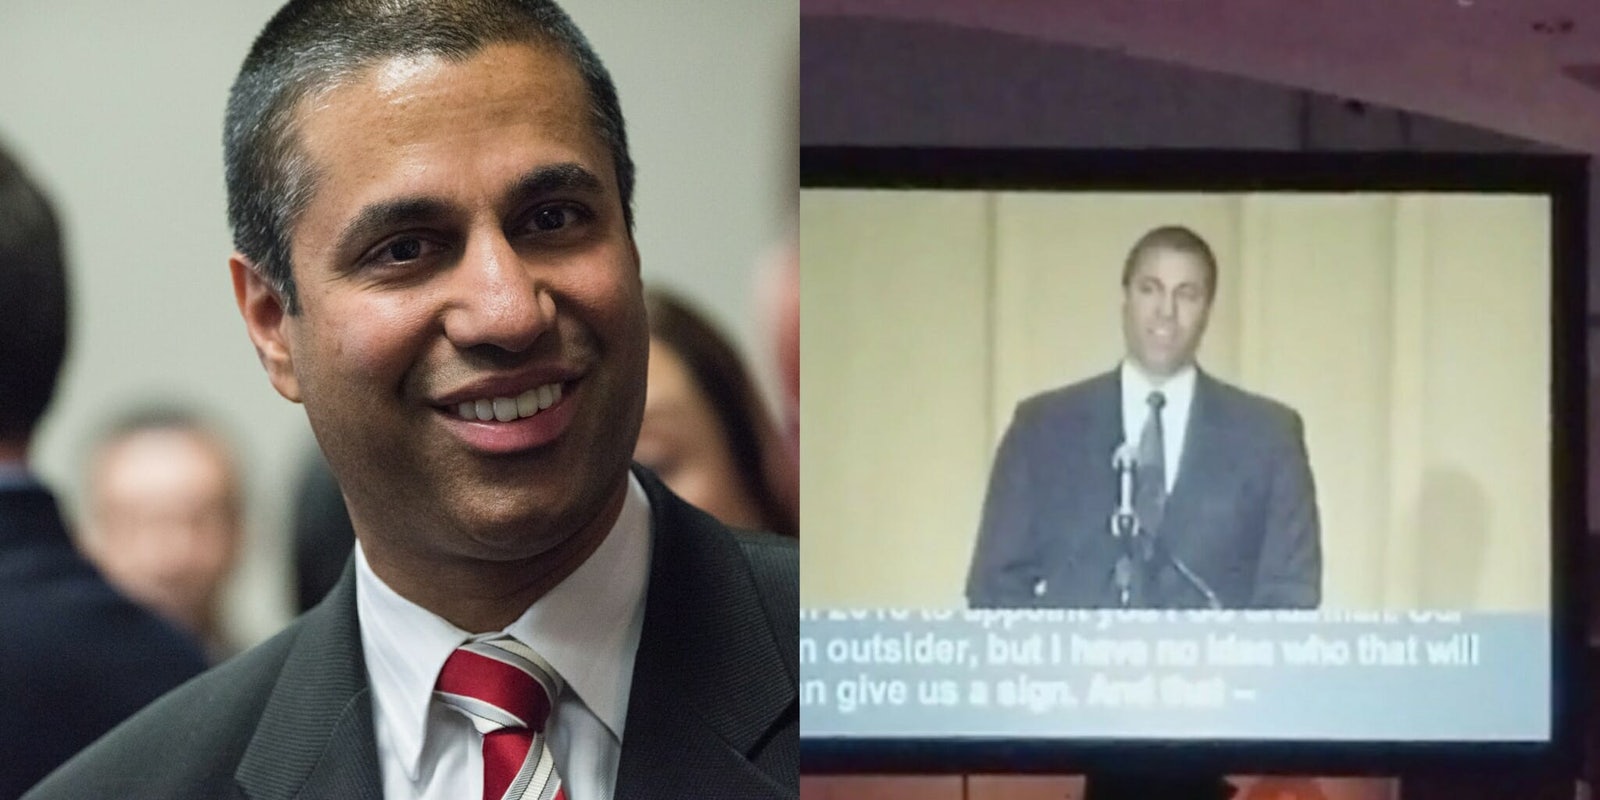 Leaked footage shows FCC Chairman Ajit Pai joking about being Verizon's pawn